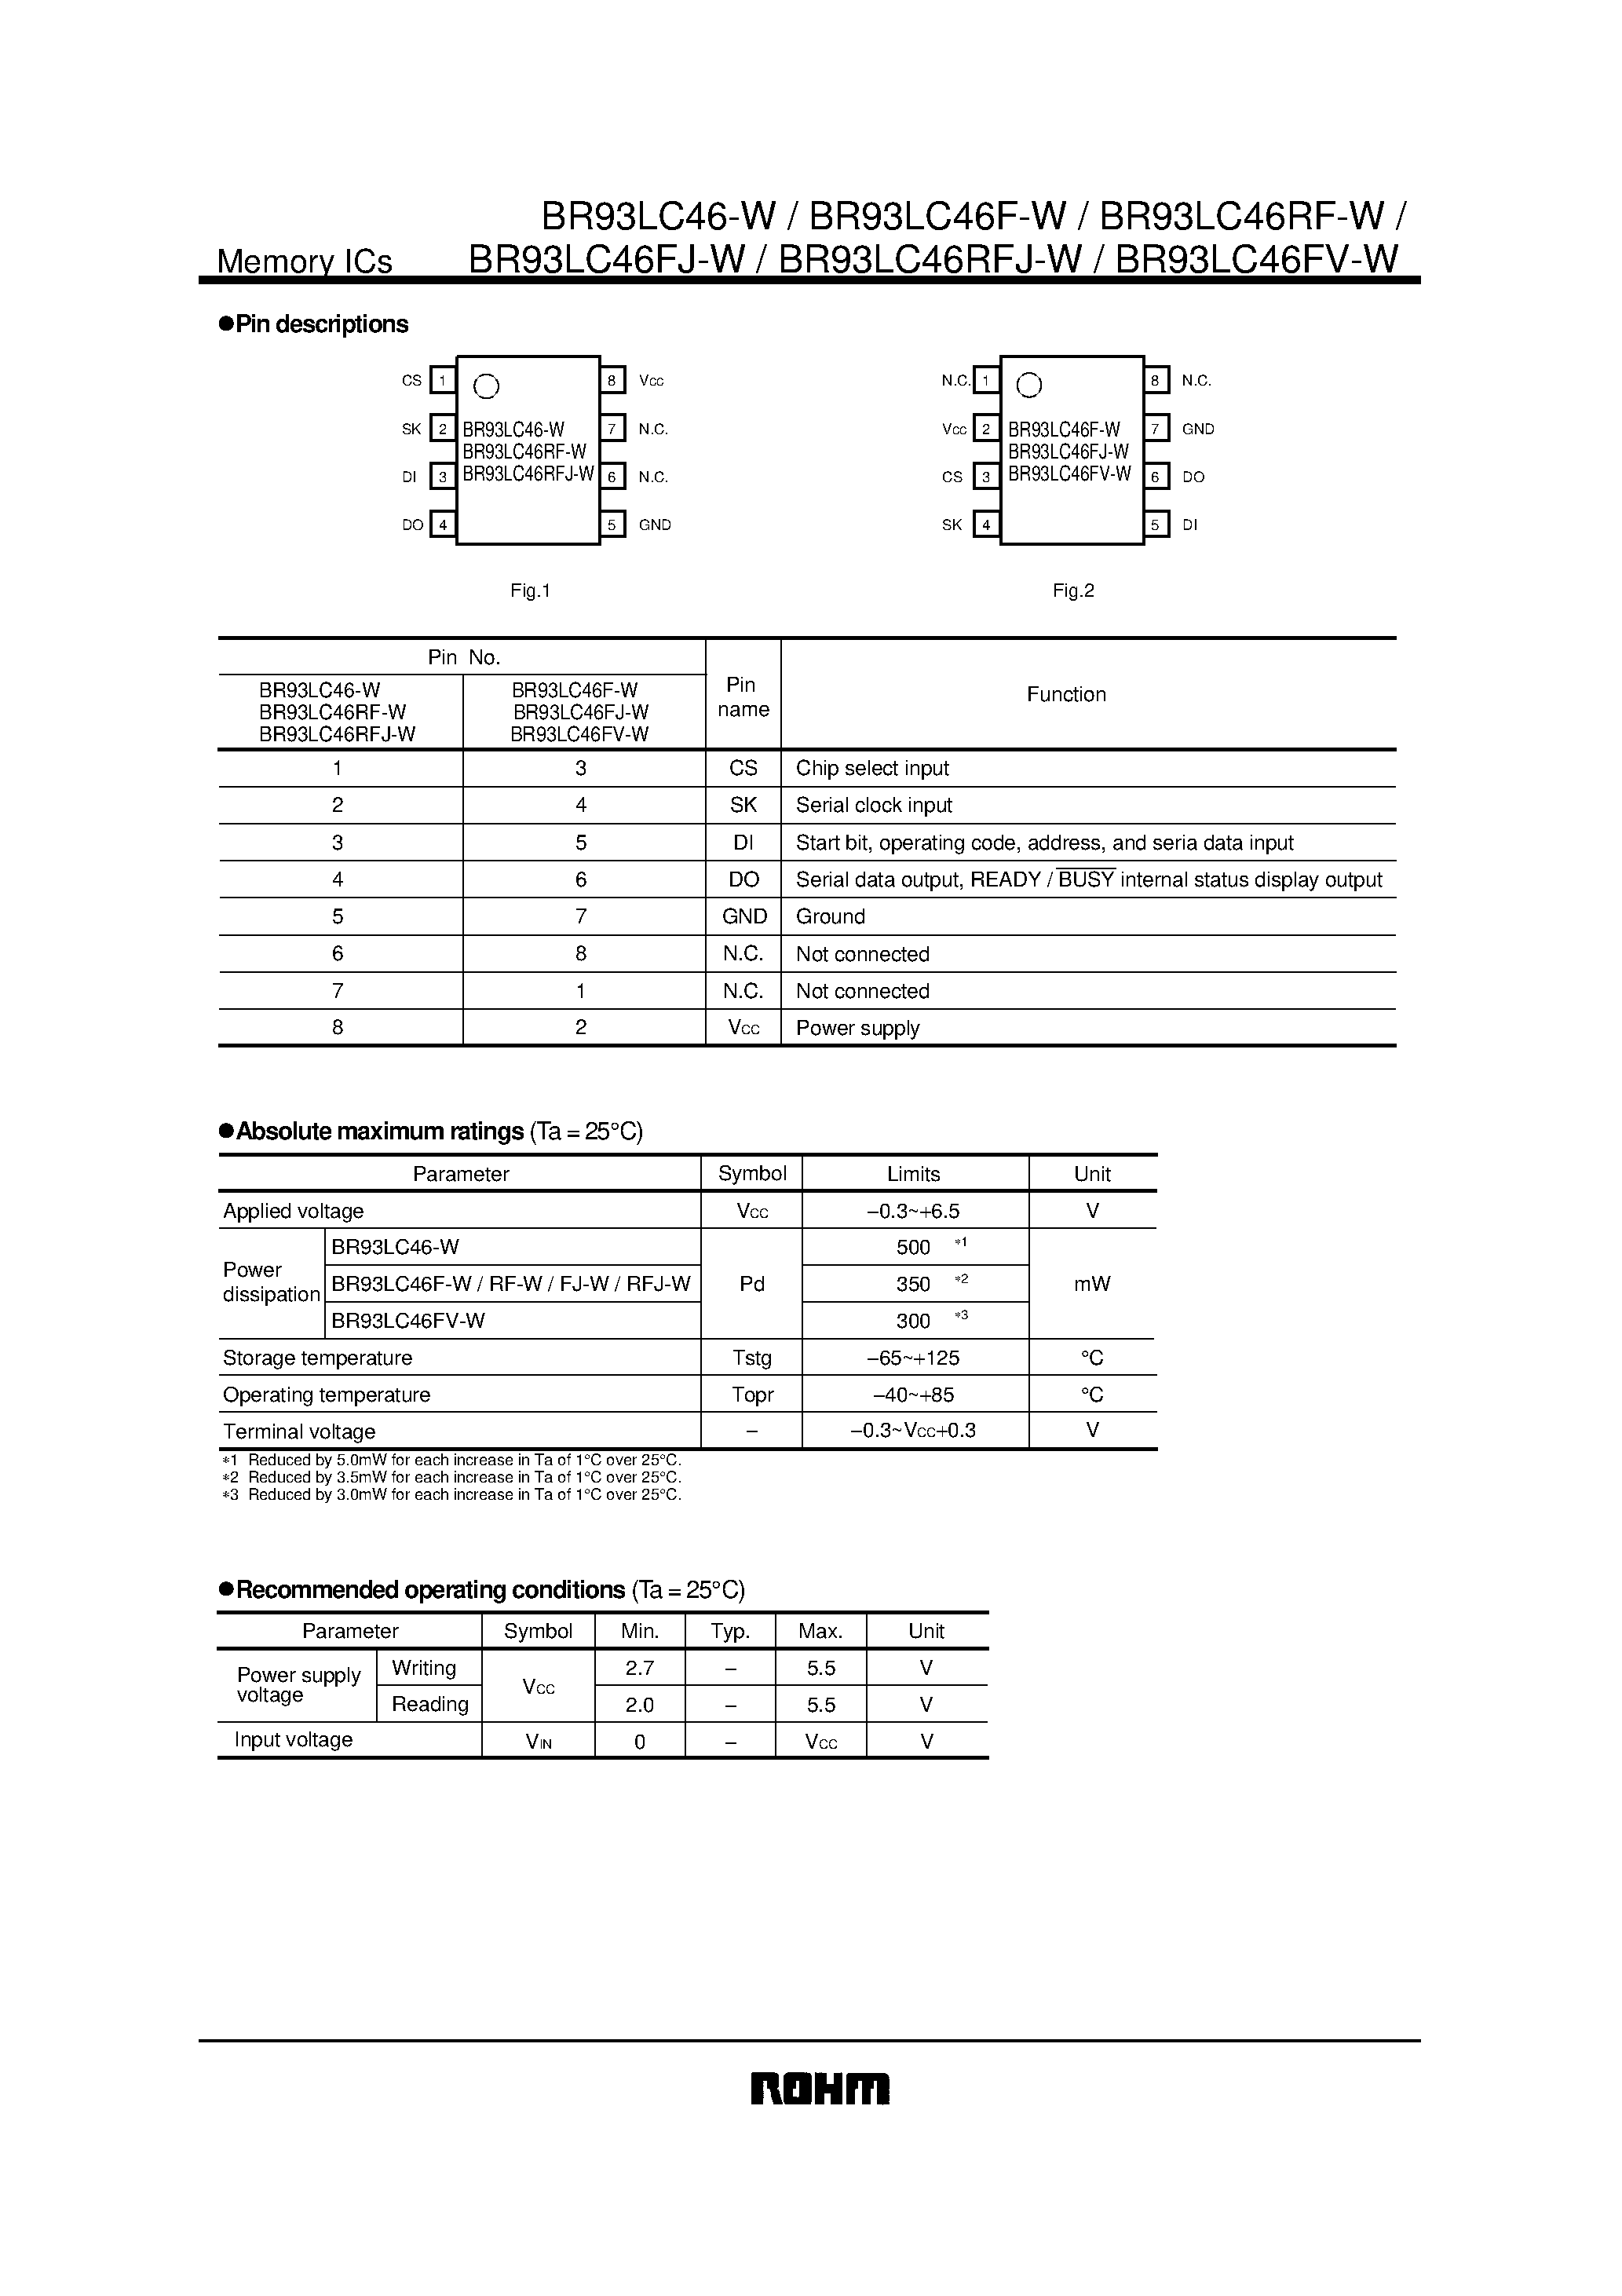 Datasheet BR93LC46FV-W - 6416bits serial EEPROM page 2